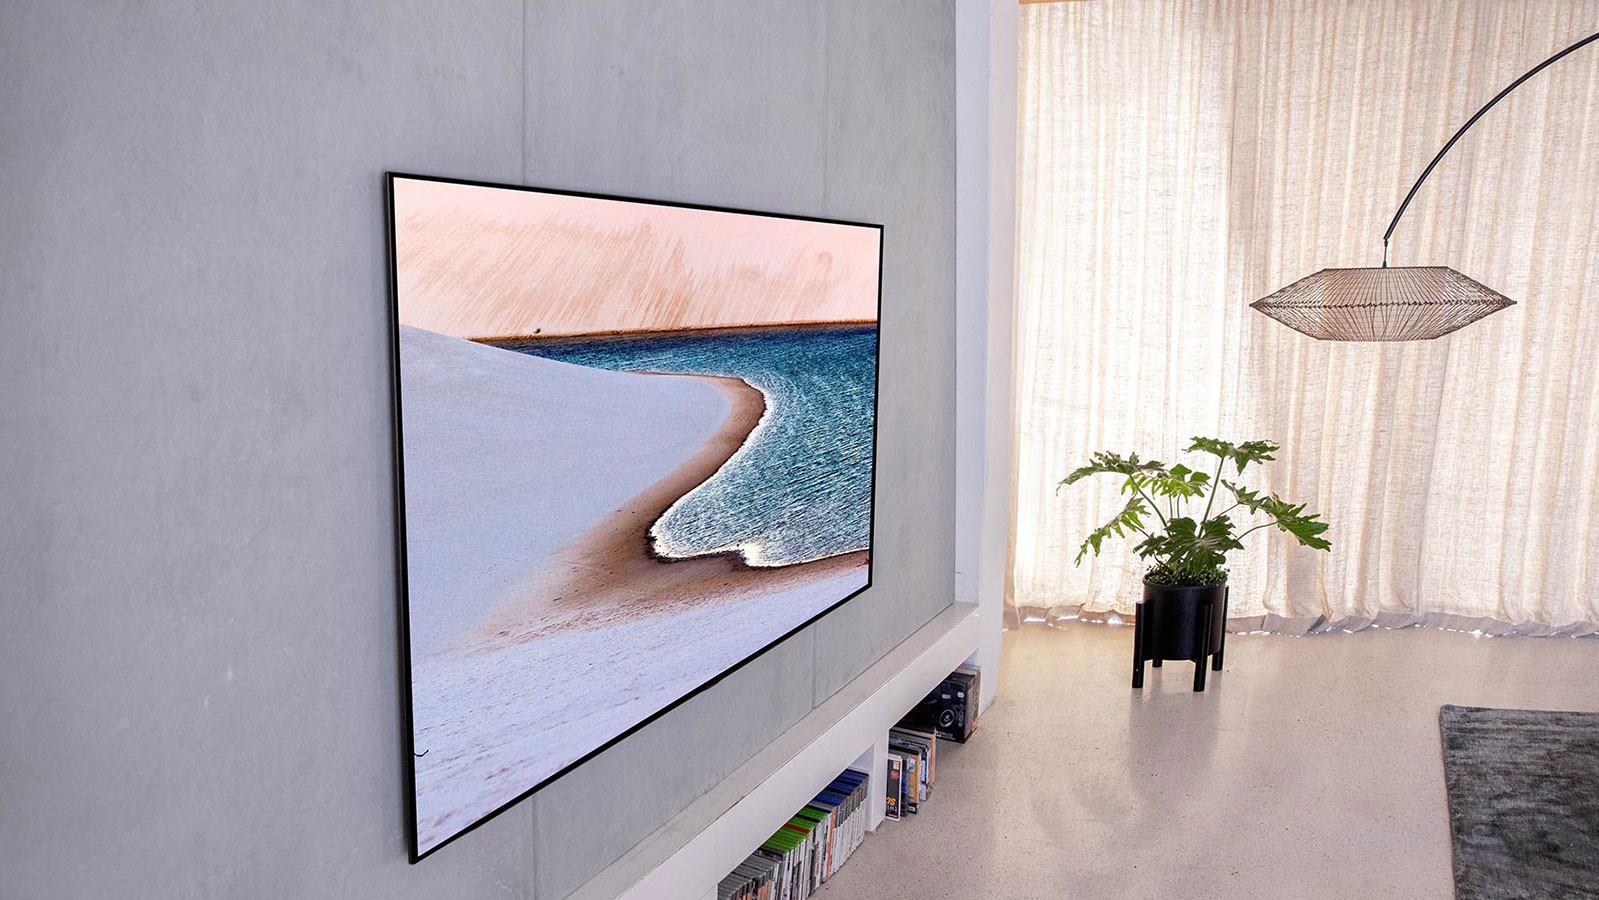 LG Gallery Series OLED TV in a grey room beside a plant